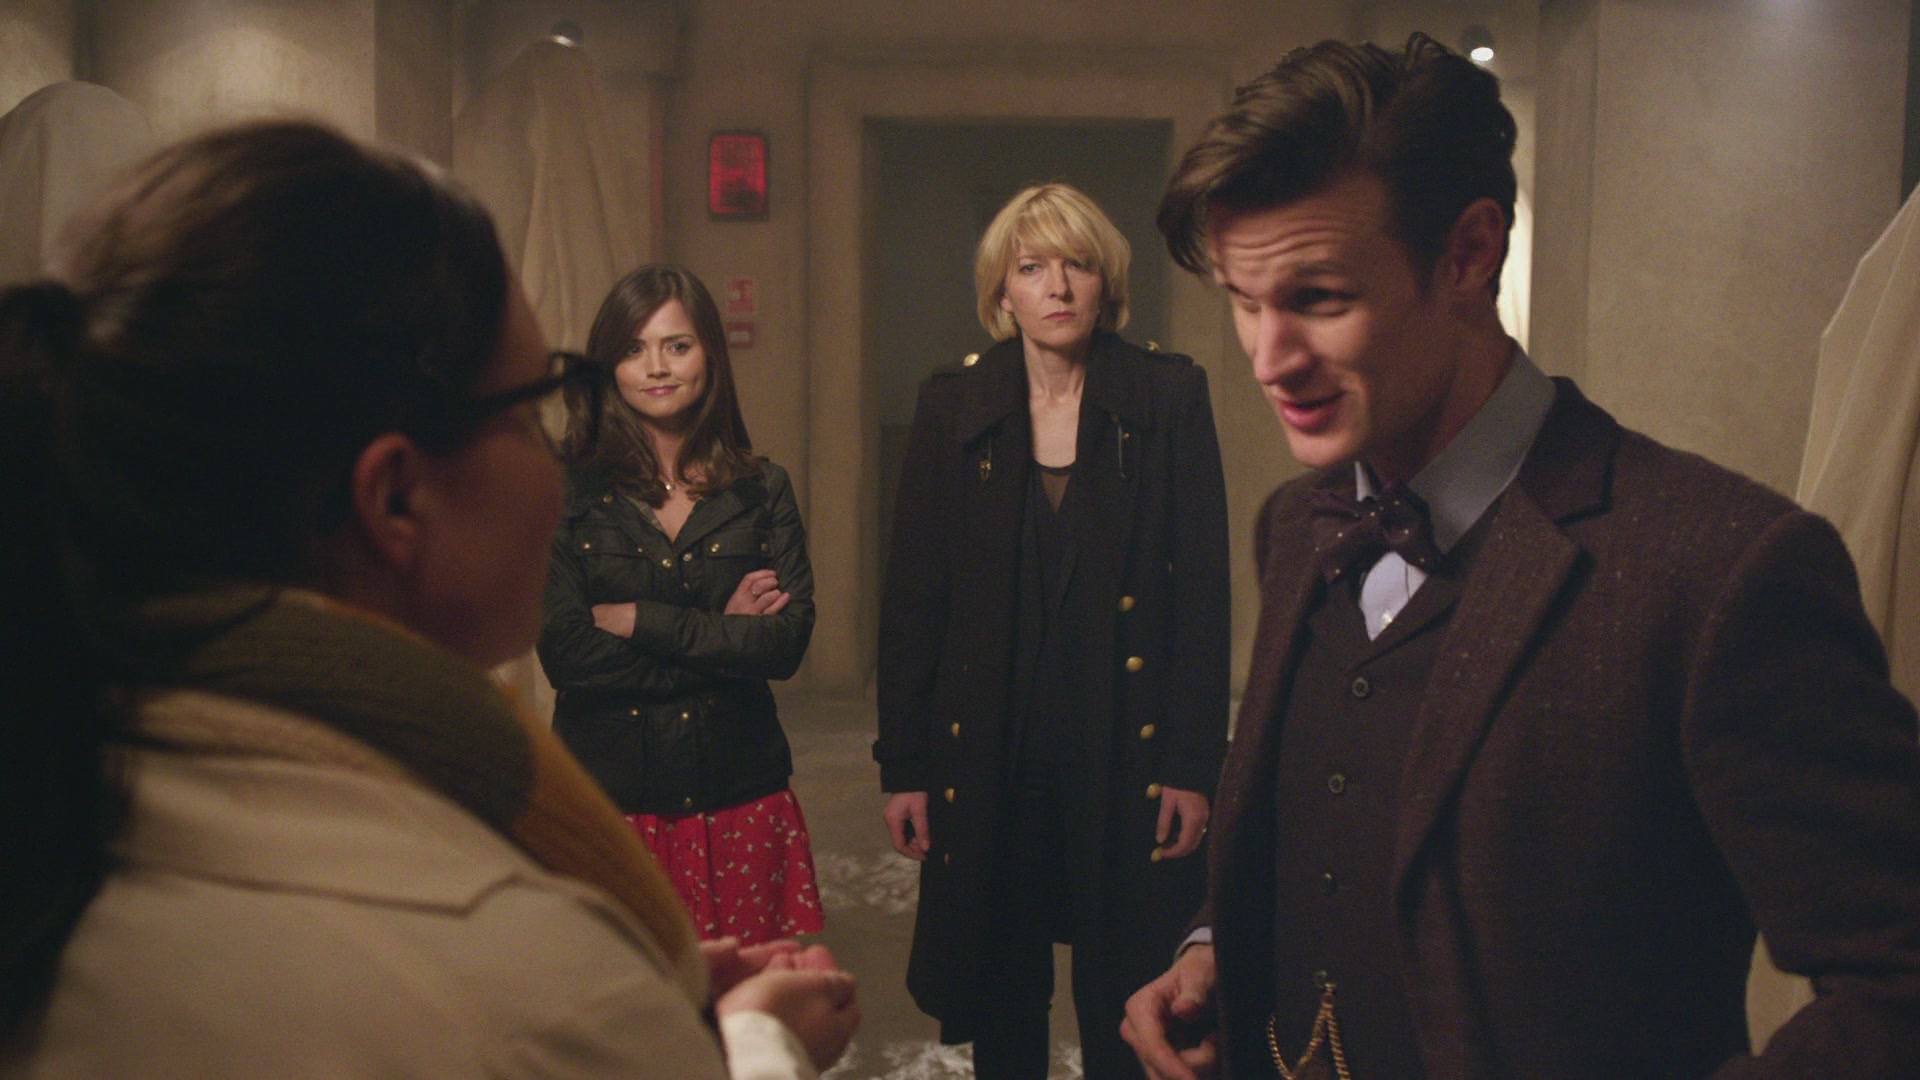 DayOfTheDoctor-Caps-0325.jpg